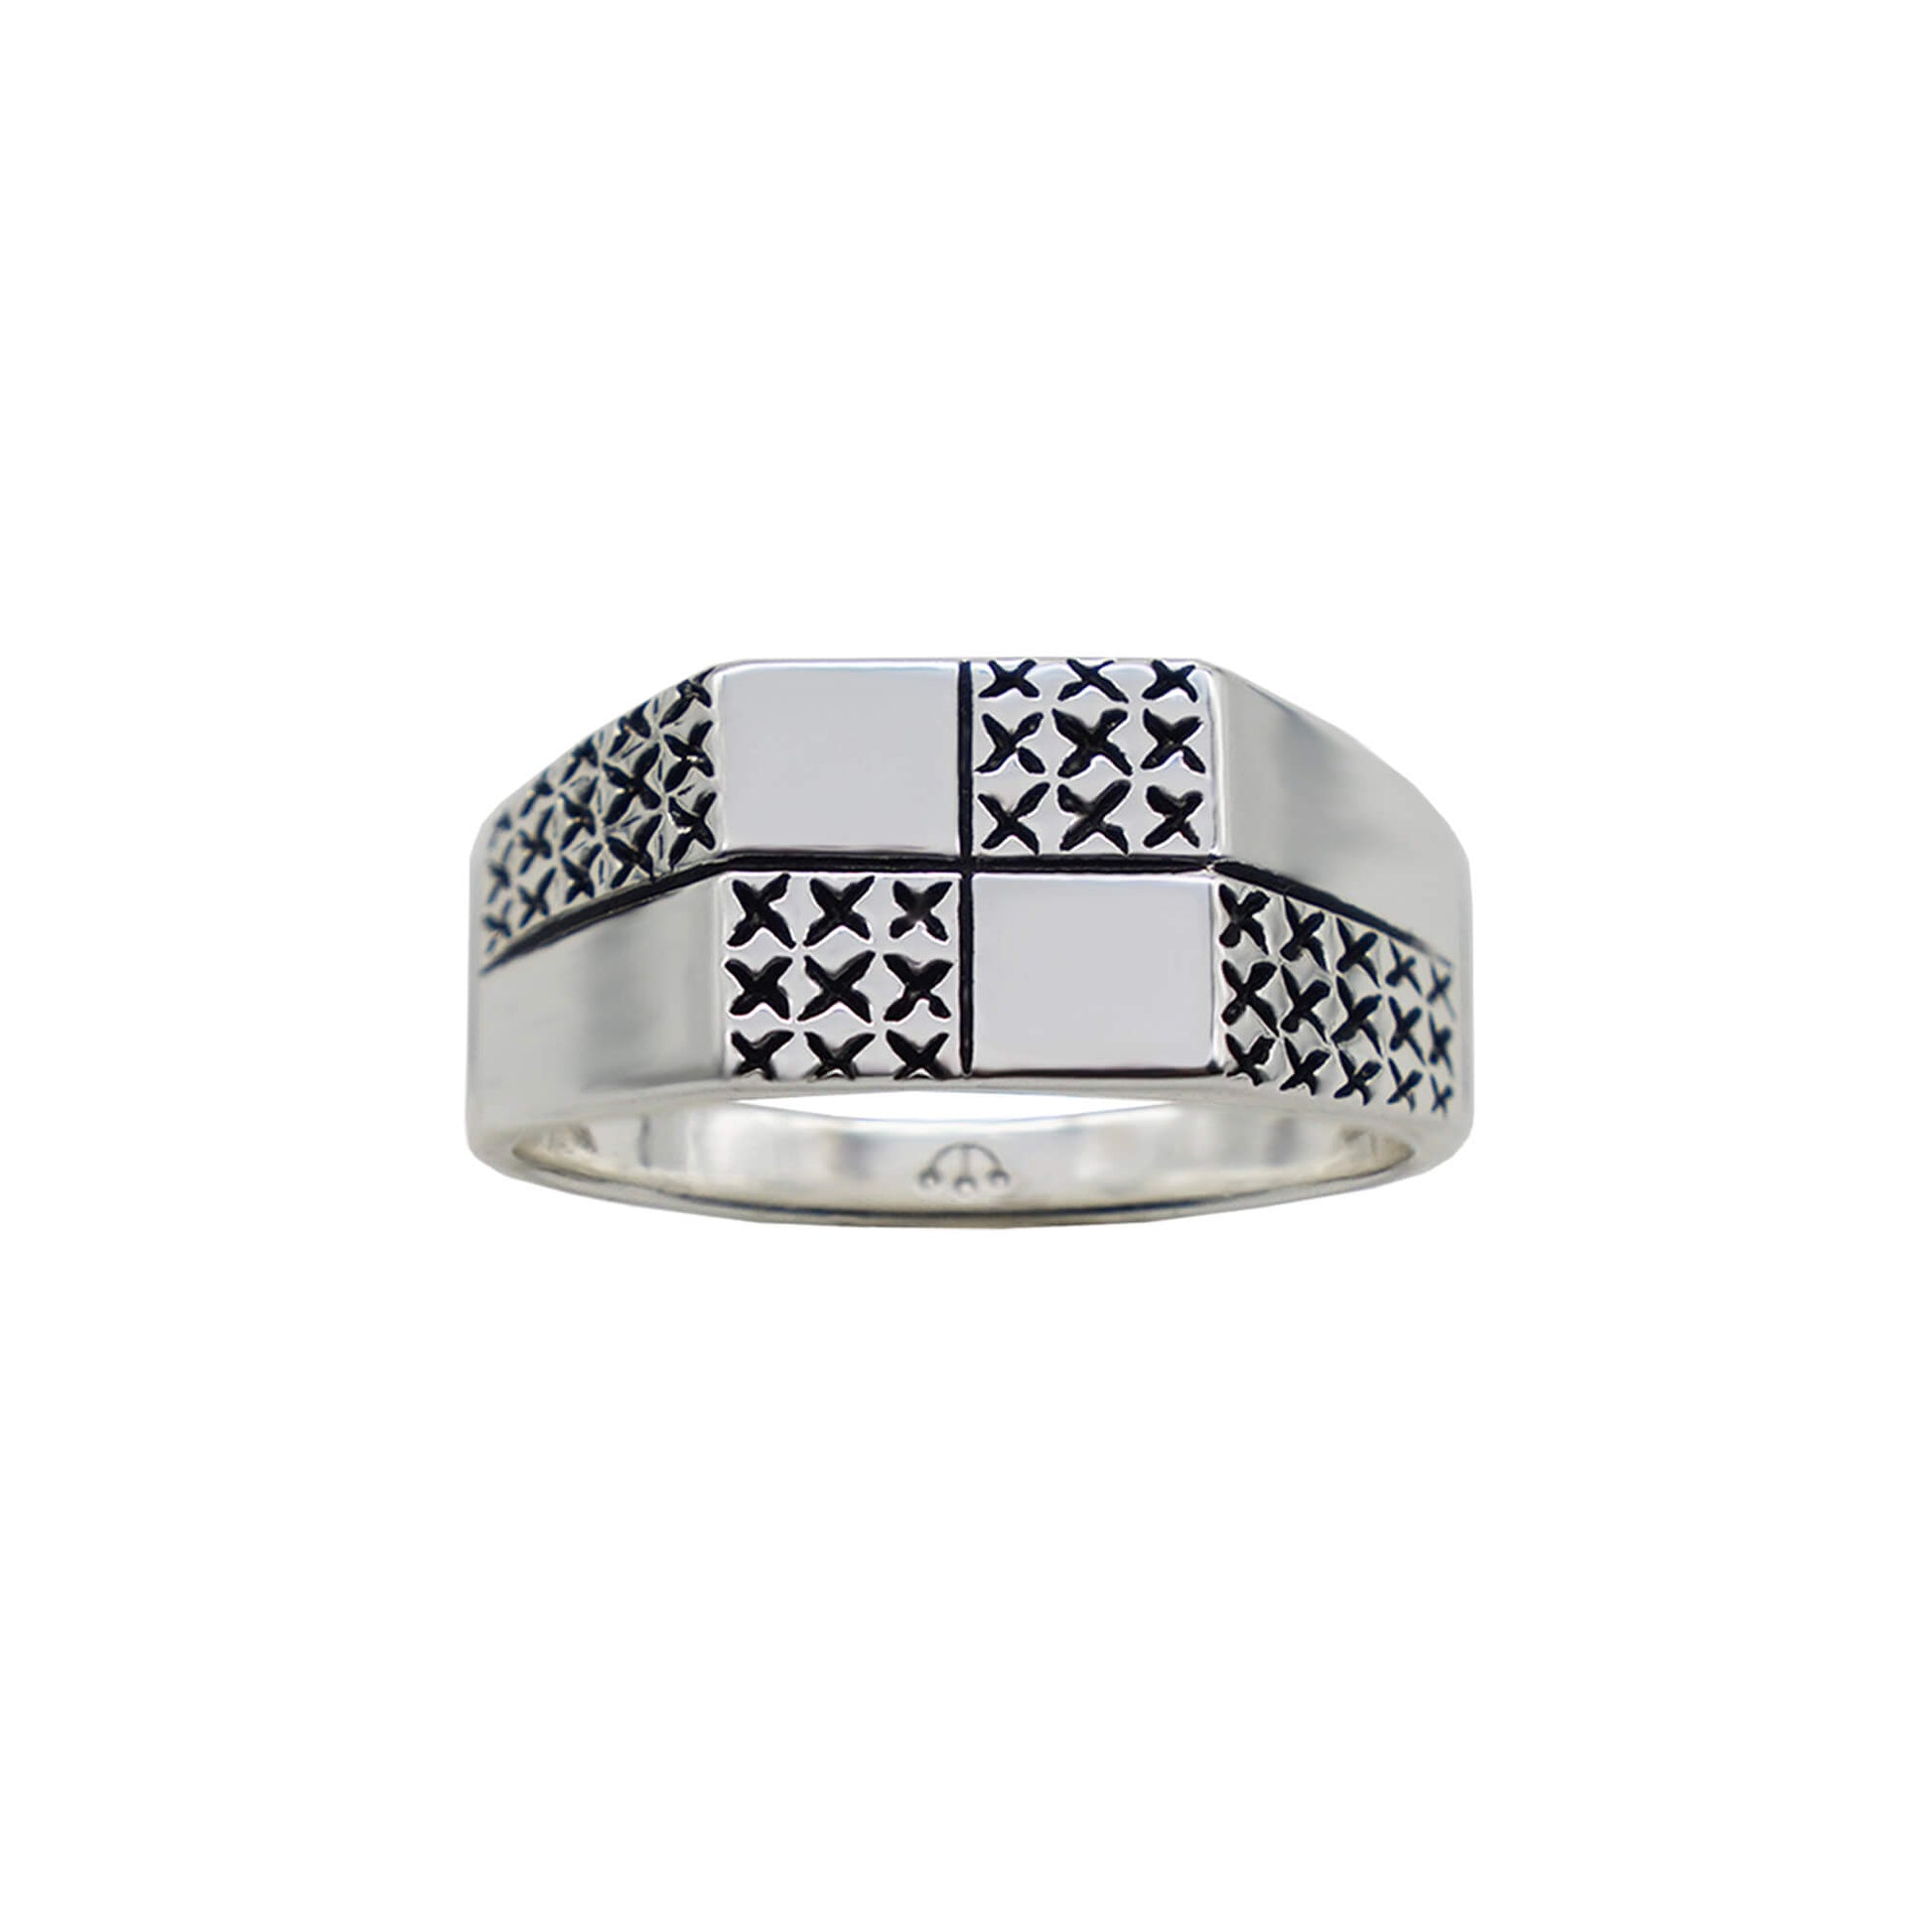 Silver square signet ring with checkerboard face and cross design.